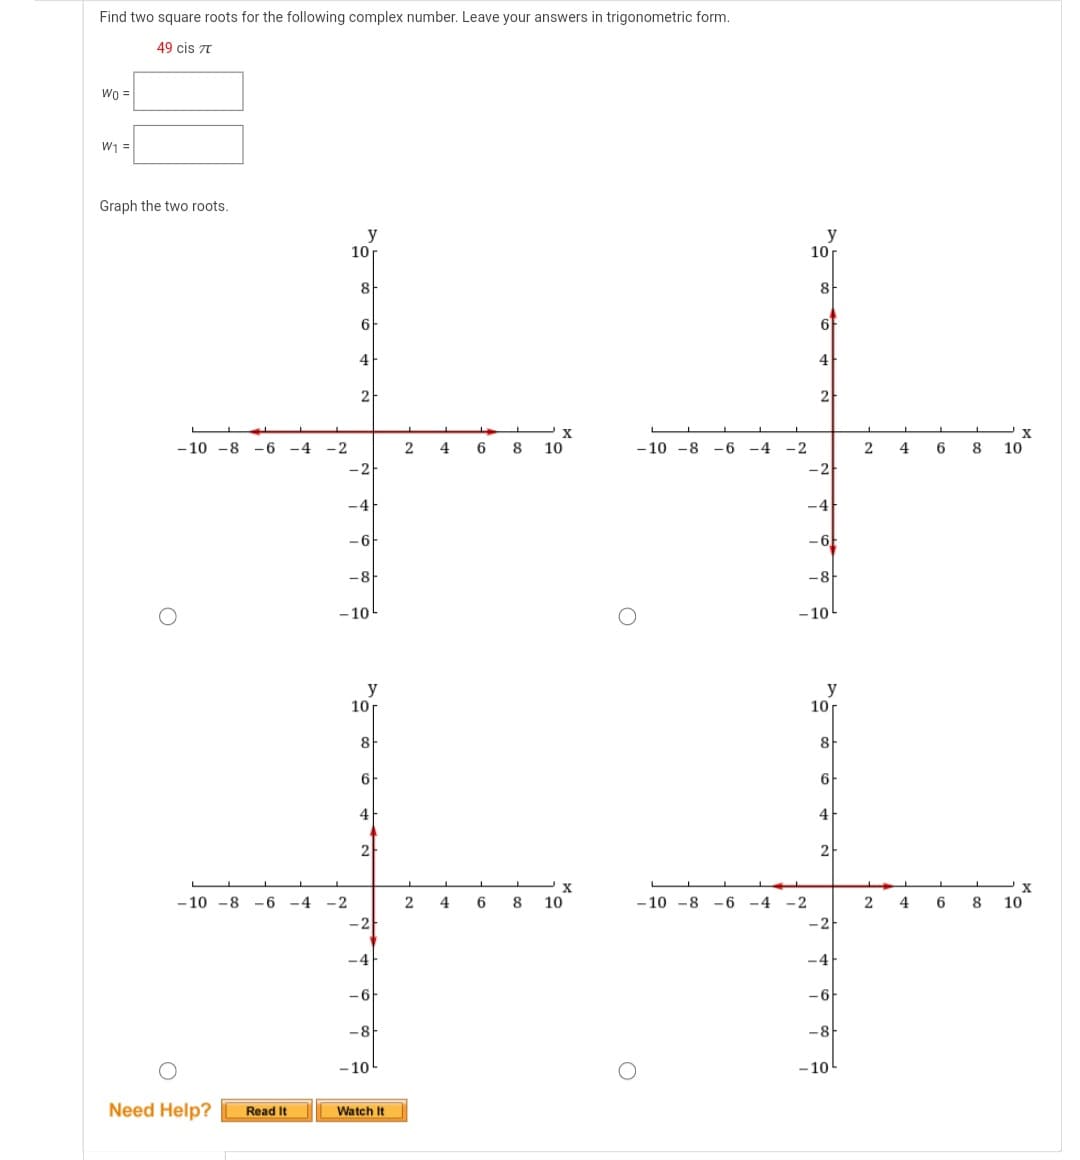 Find two square roots for the following complex number. Leave your answers in trigonometric form.
49 cis 7T
Wo =
W₁ =
Graph the two roots.
-10 -8 -6 -4 -2
O
Need Help? Read It
y
-10 -8 -6 -4 -2
10
8
6
4
2
-2
-4
-6
-8
-10
y
10
8
6
4
2
-2
-4
-6
-8
-10
Watch It
2
L
2
L
X
468 10
4 6
8
X
10
O
-10 -8 -6 -4 -2
y
10 r
8
-10 -8 -6 -4 -2
6
4
2
-2
-4
-6
-8
-10
y
10 r
8
6
4
2
-2
-4
-6
-8
-10
2
X
468 10
X
246 8 10